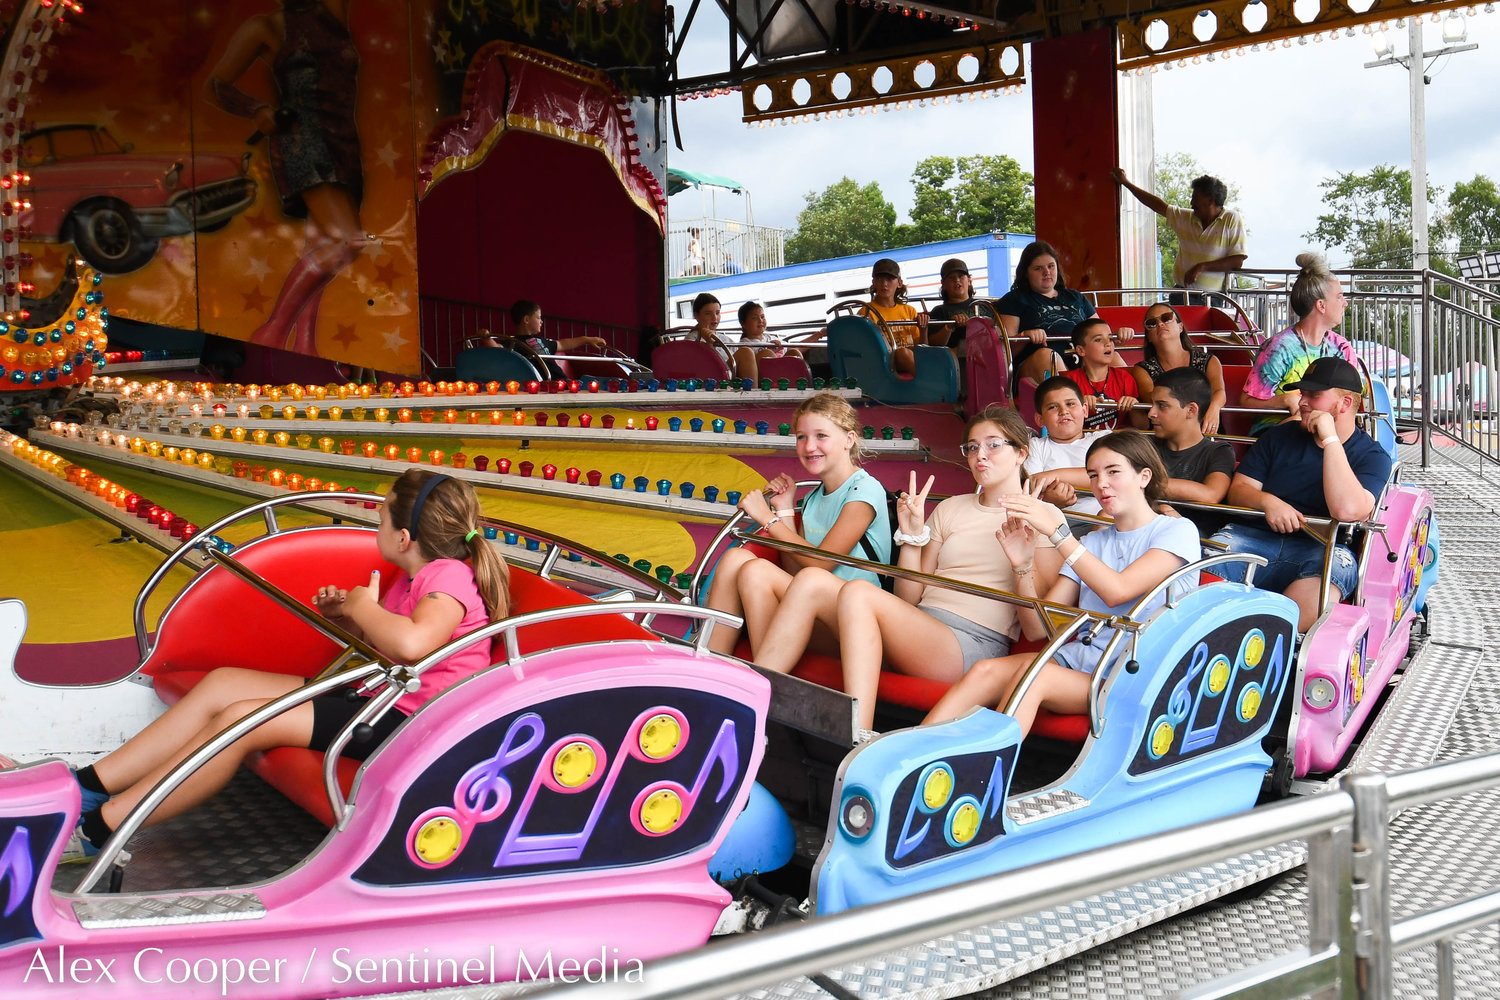 Fairgoers ride the Rock & Roll on Thursday at the Herkimer County Fair in Frankfort.